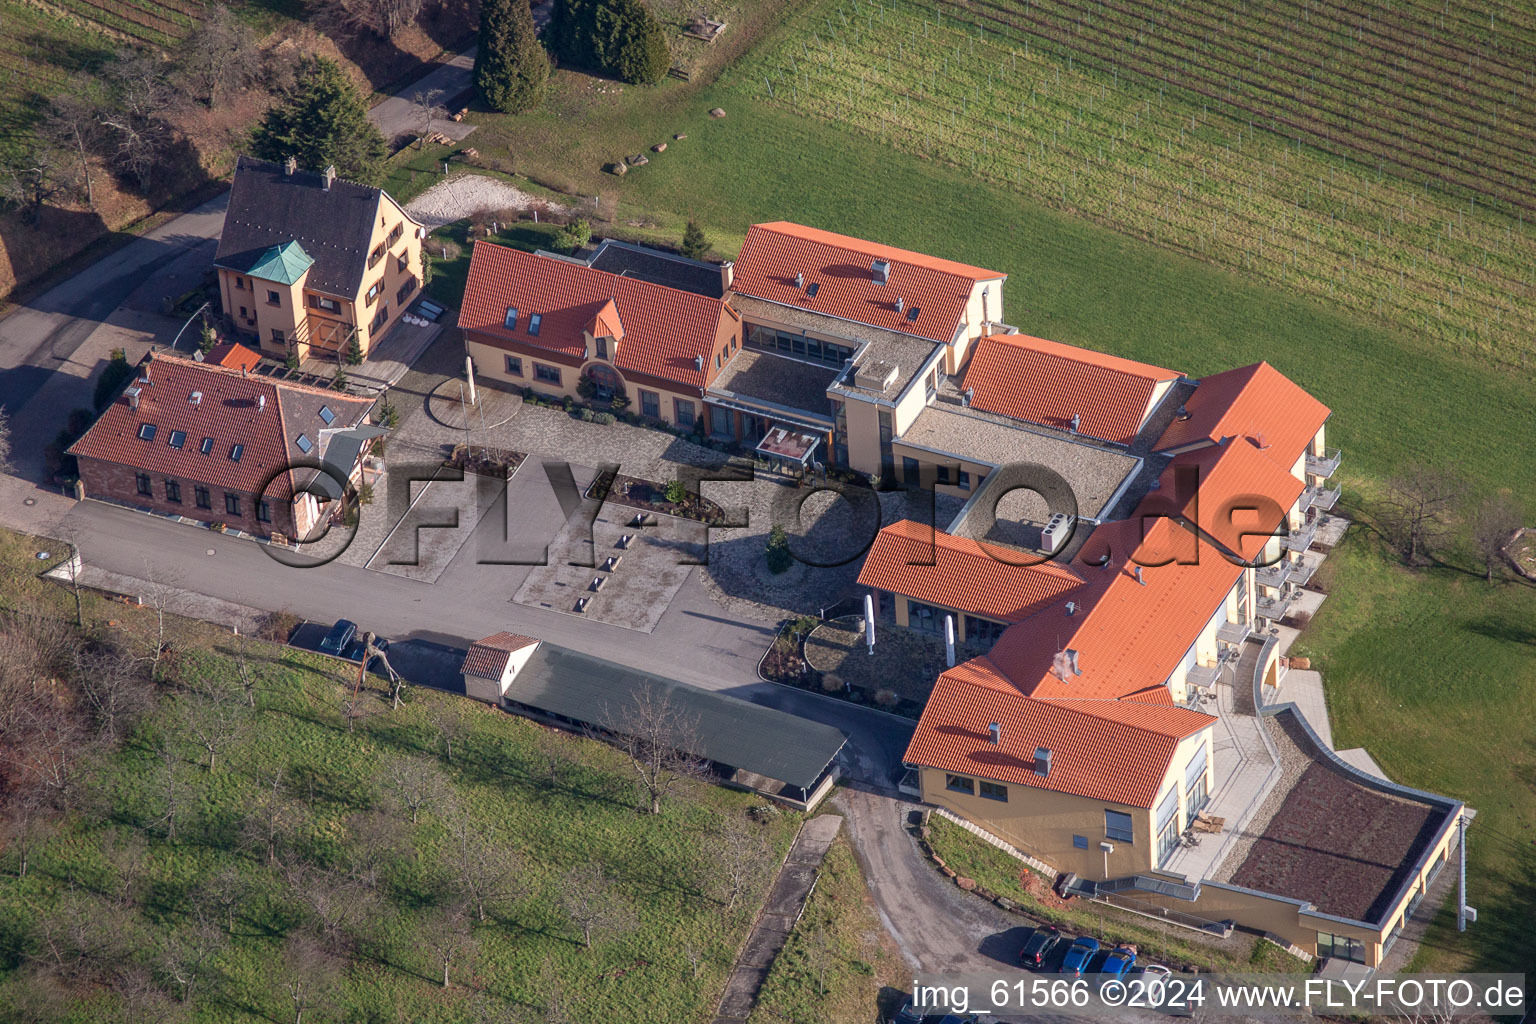 Complex of the hotel building Wohlfuehlhotel Alte Rebschule and Gasthaus Sesel in Rhodt unter Rietburg in the state Rhineland-Palatinate, Germany from above